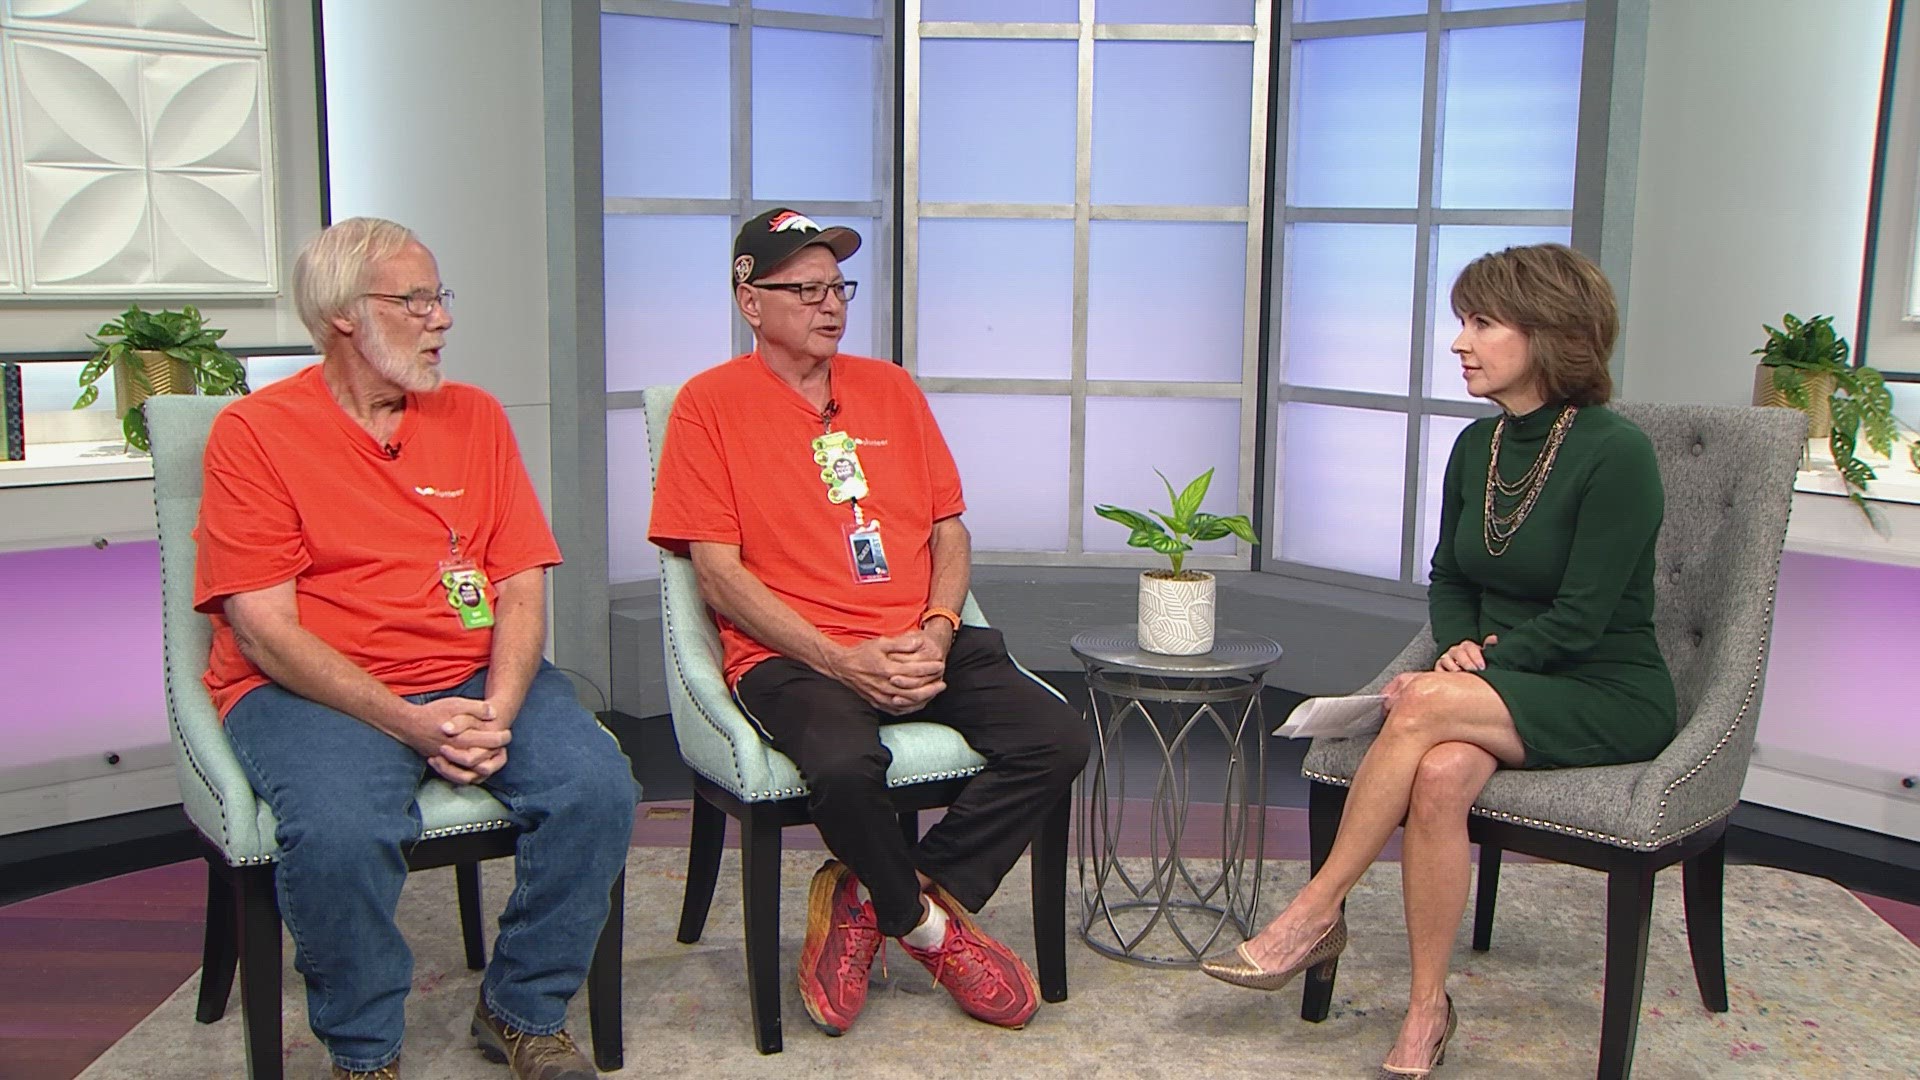 Archie Trujillo and Kent Woodward joined 9NEWS to talk about their experience volunteering with Food Bank for Larimer County, and how you can get involved.